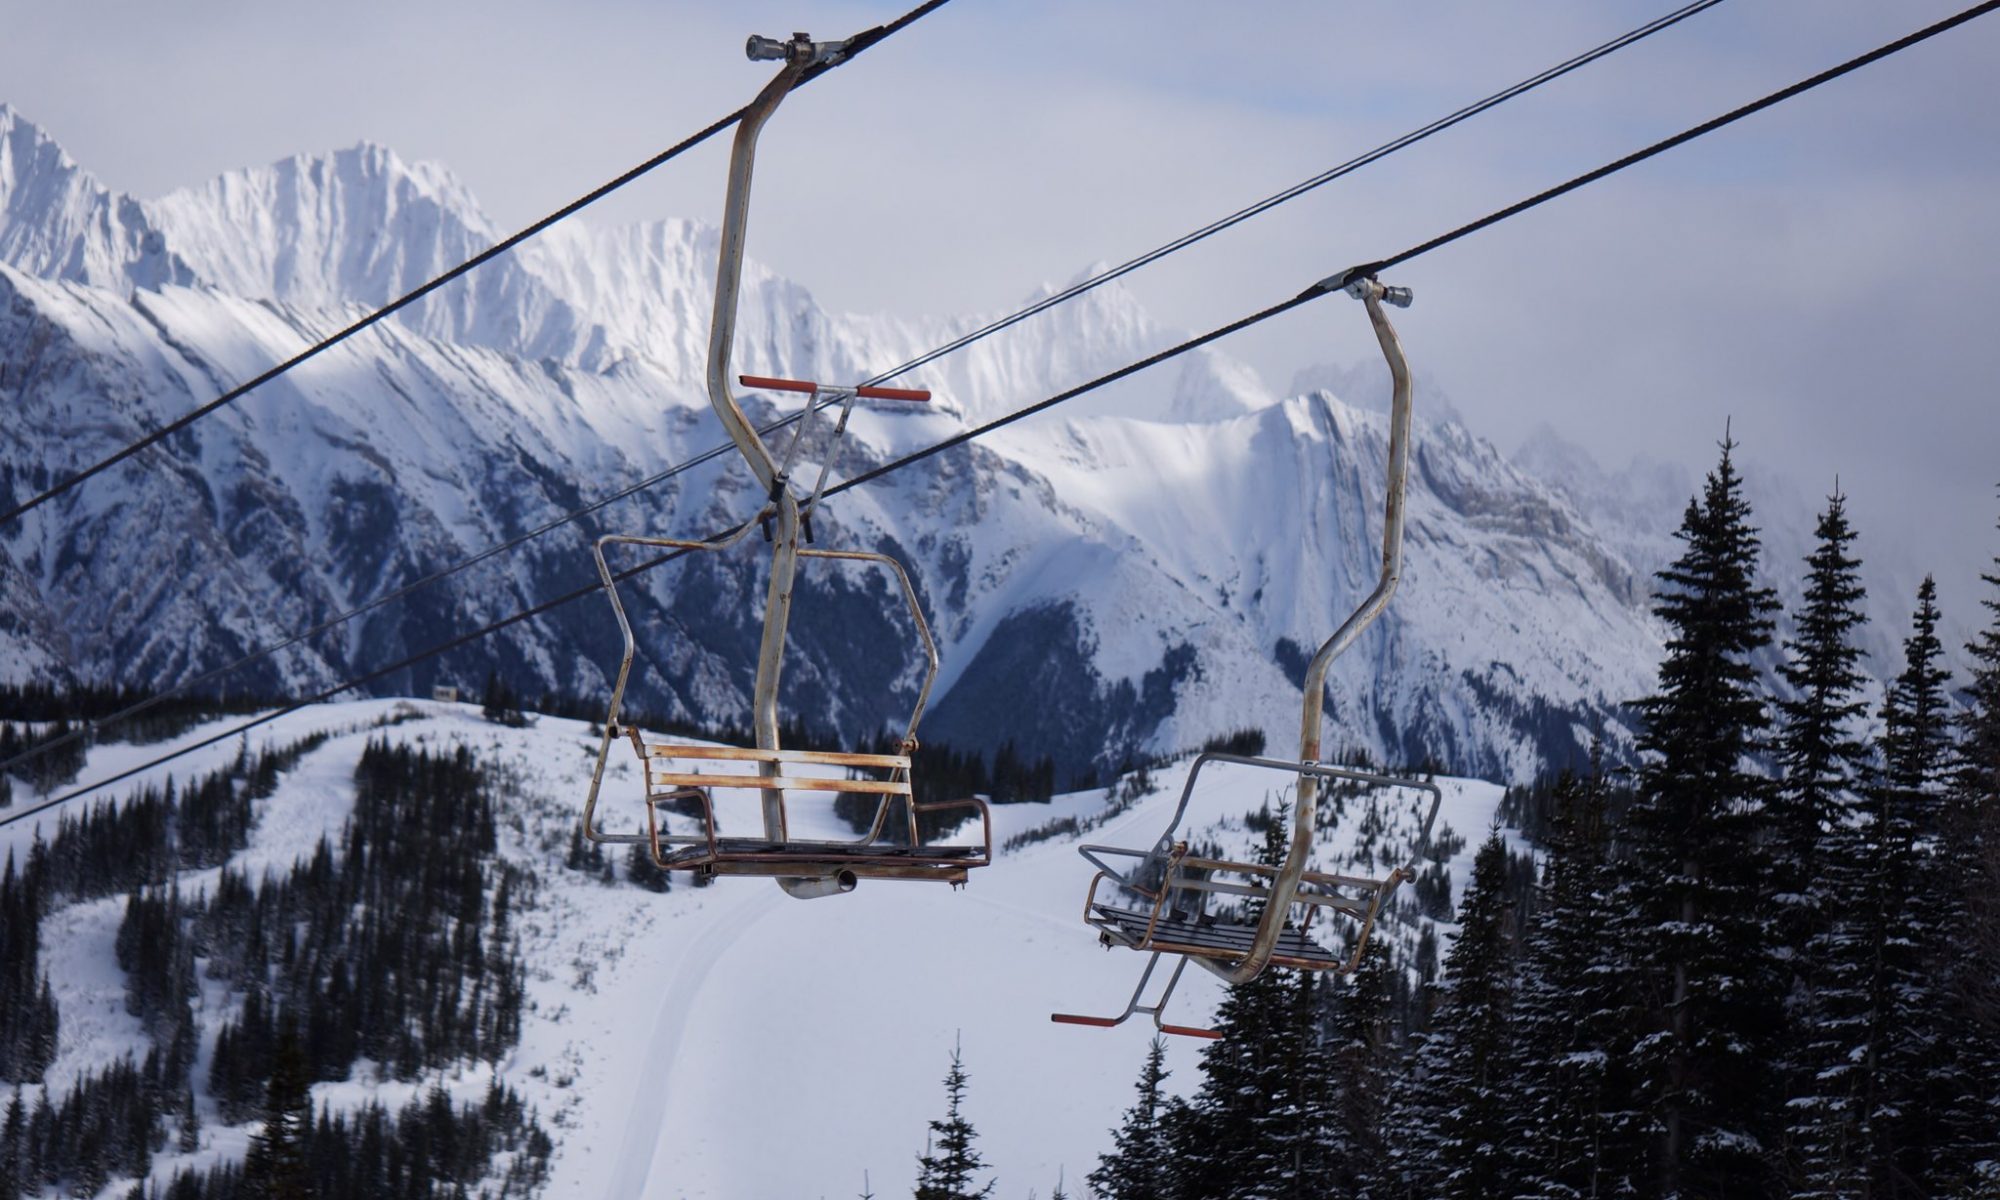 Fortress Mountain Ski Resort is eyeing a 2020 opening. Photo: Fortress Mountain Ski Resort.